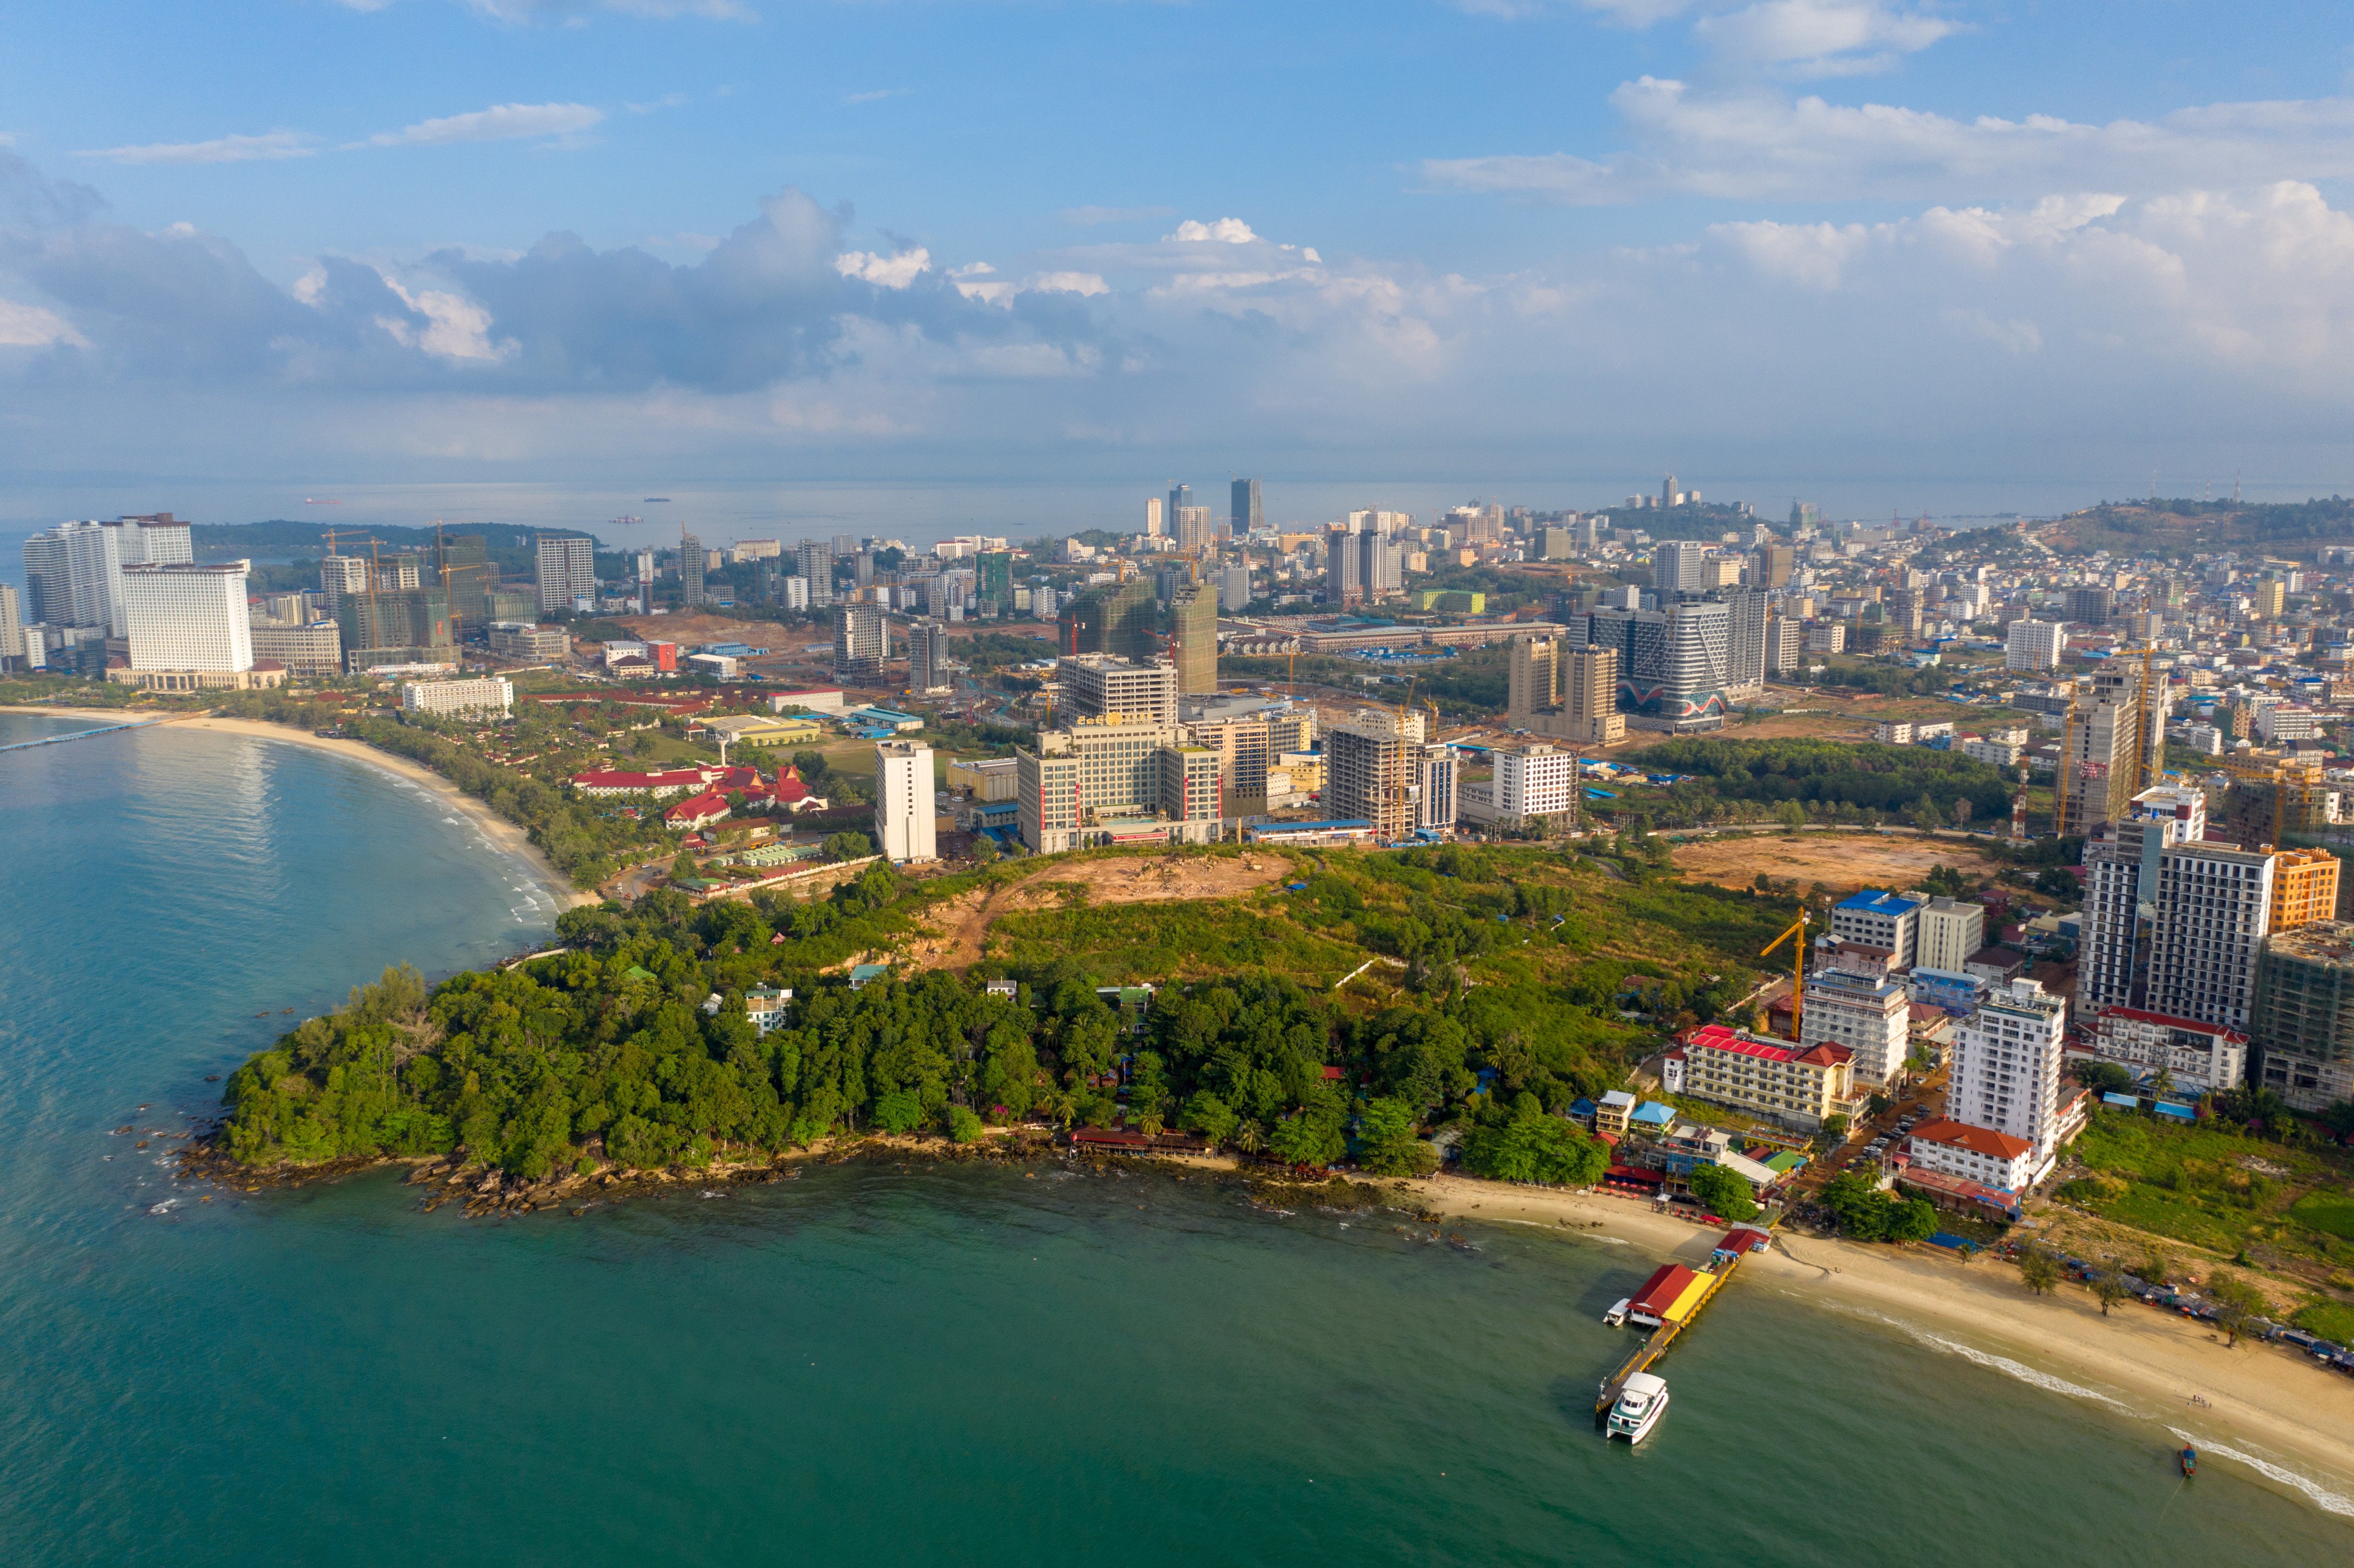 An aerial view of Sihanoukville. The city has become known as a hub for scam operations over the past few years. Photo: Shutterstock